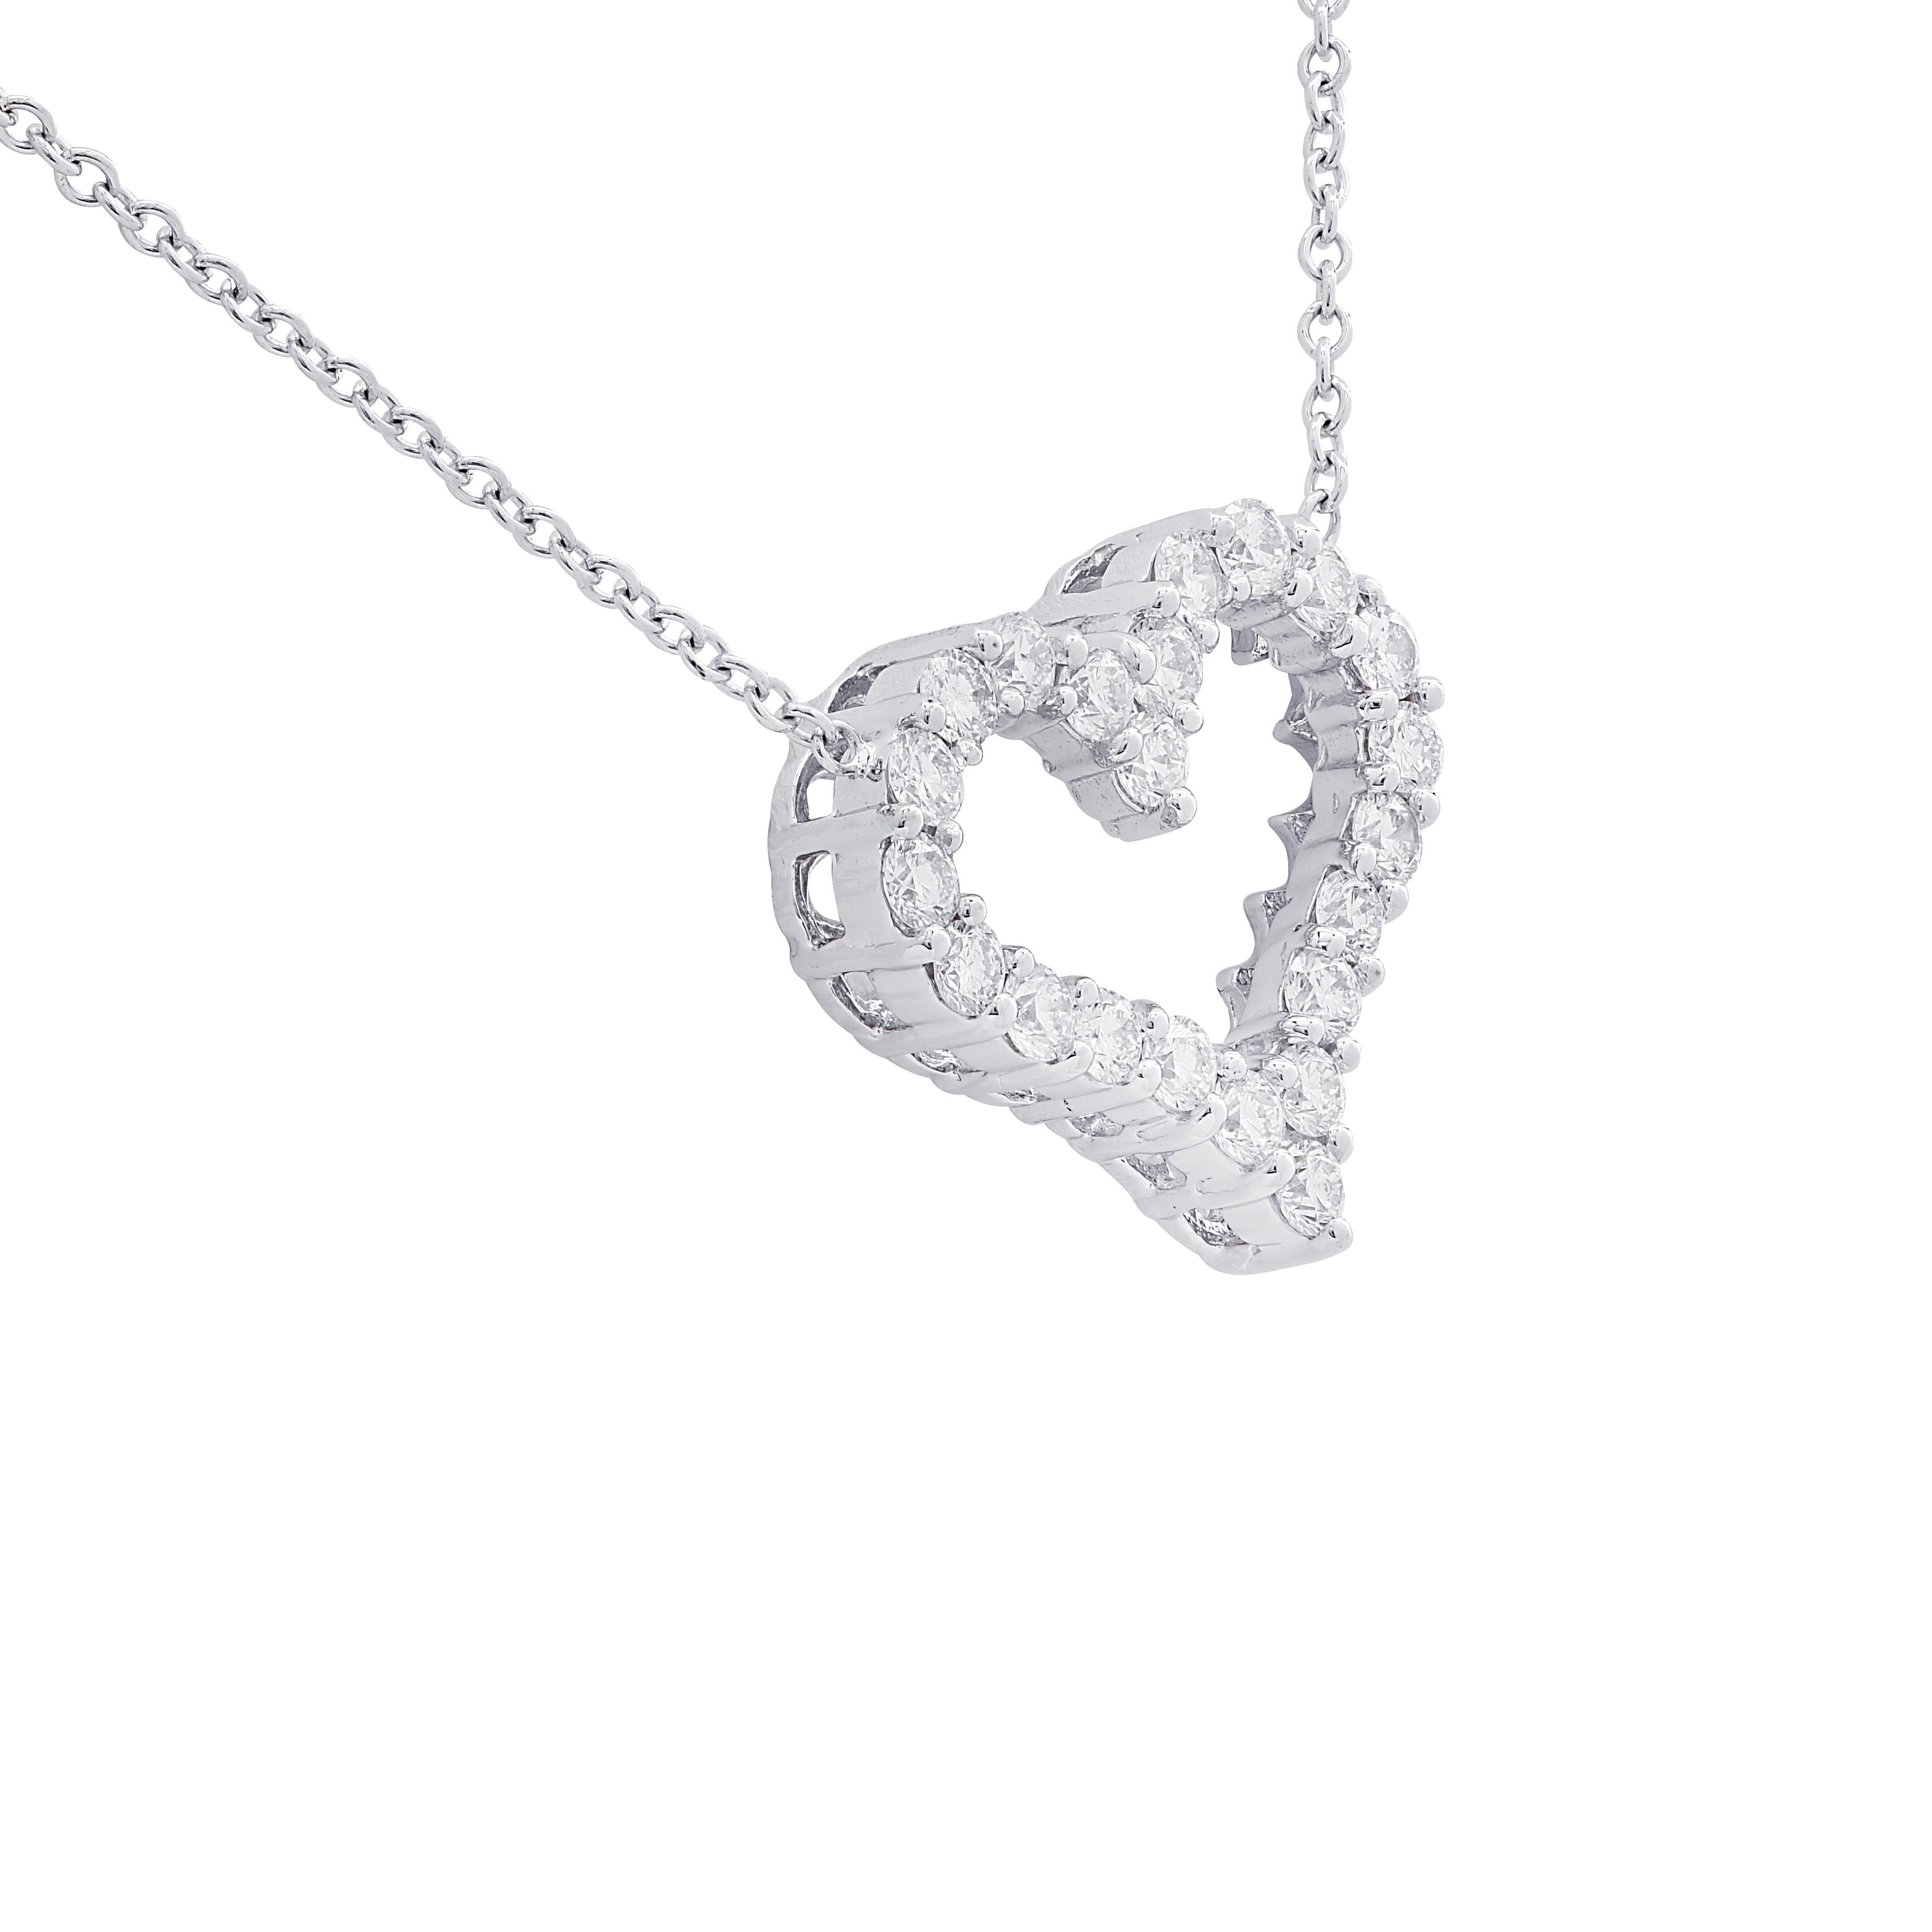 Enchanting Vivid Diamonds heart necklace crafted in 18 karat white gold featuring 22 round brilliant cut diamonds weighing approximately 1.5 carats total, G color, VS-SI clarity arranged in a delightful open heart design. This stunning necklace